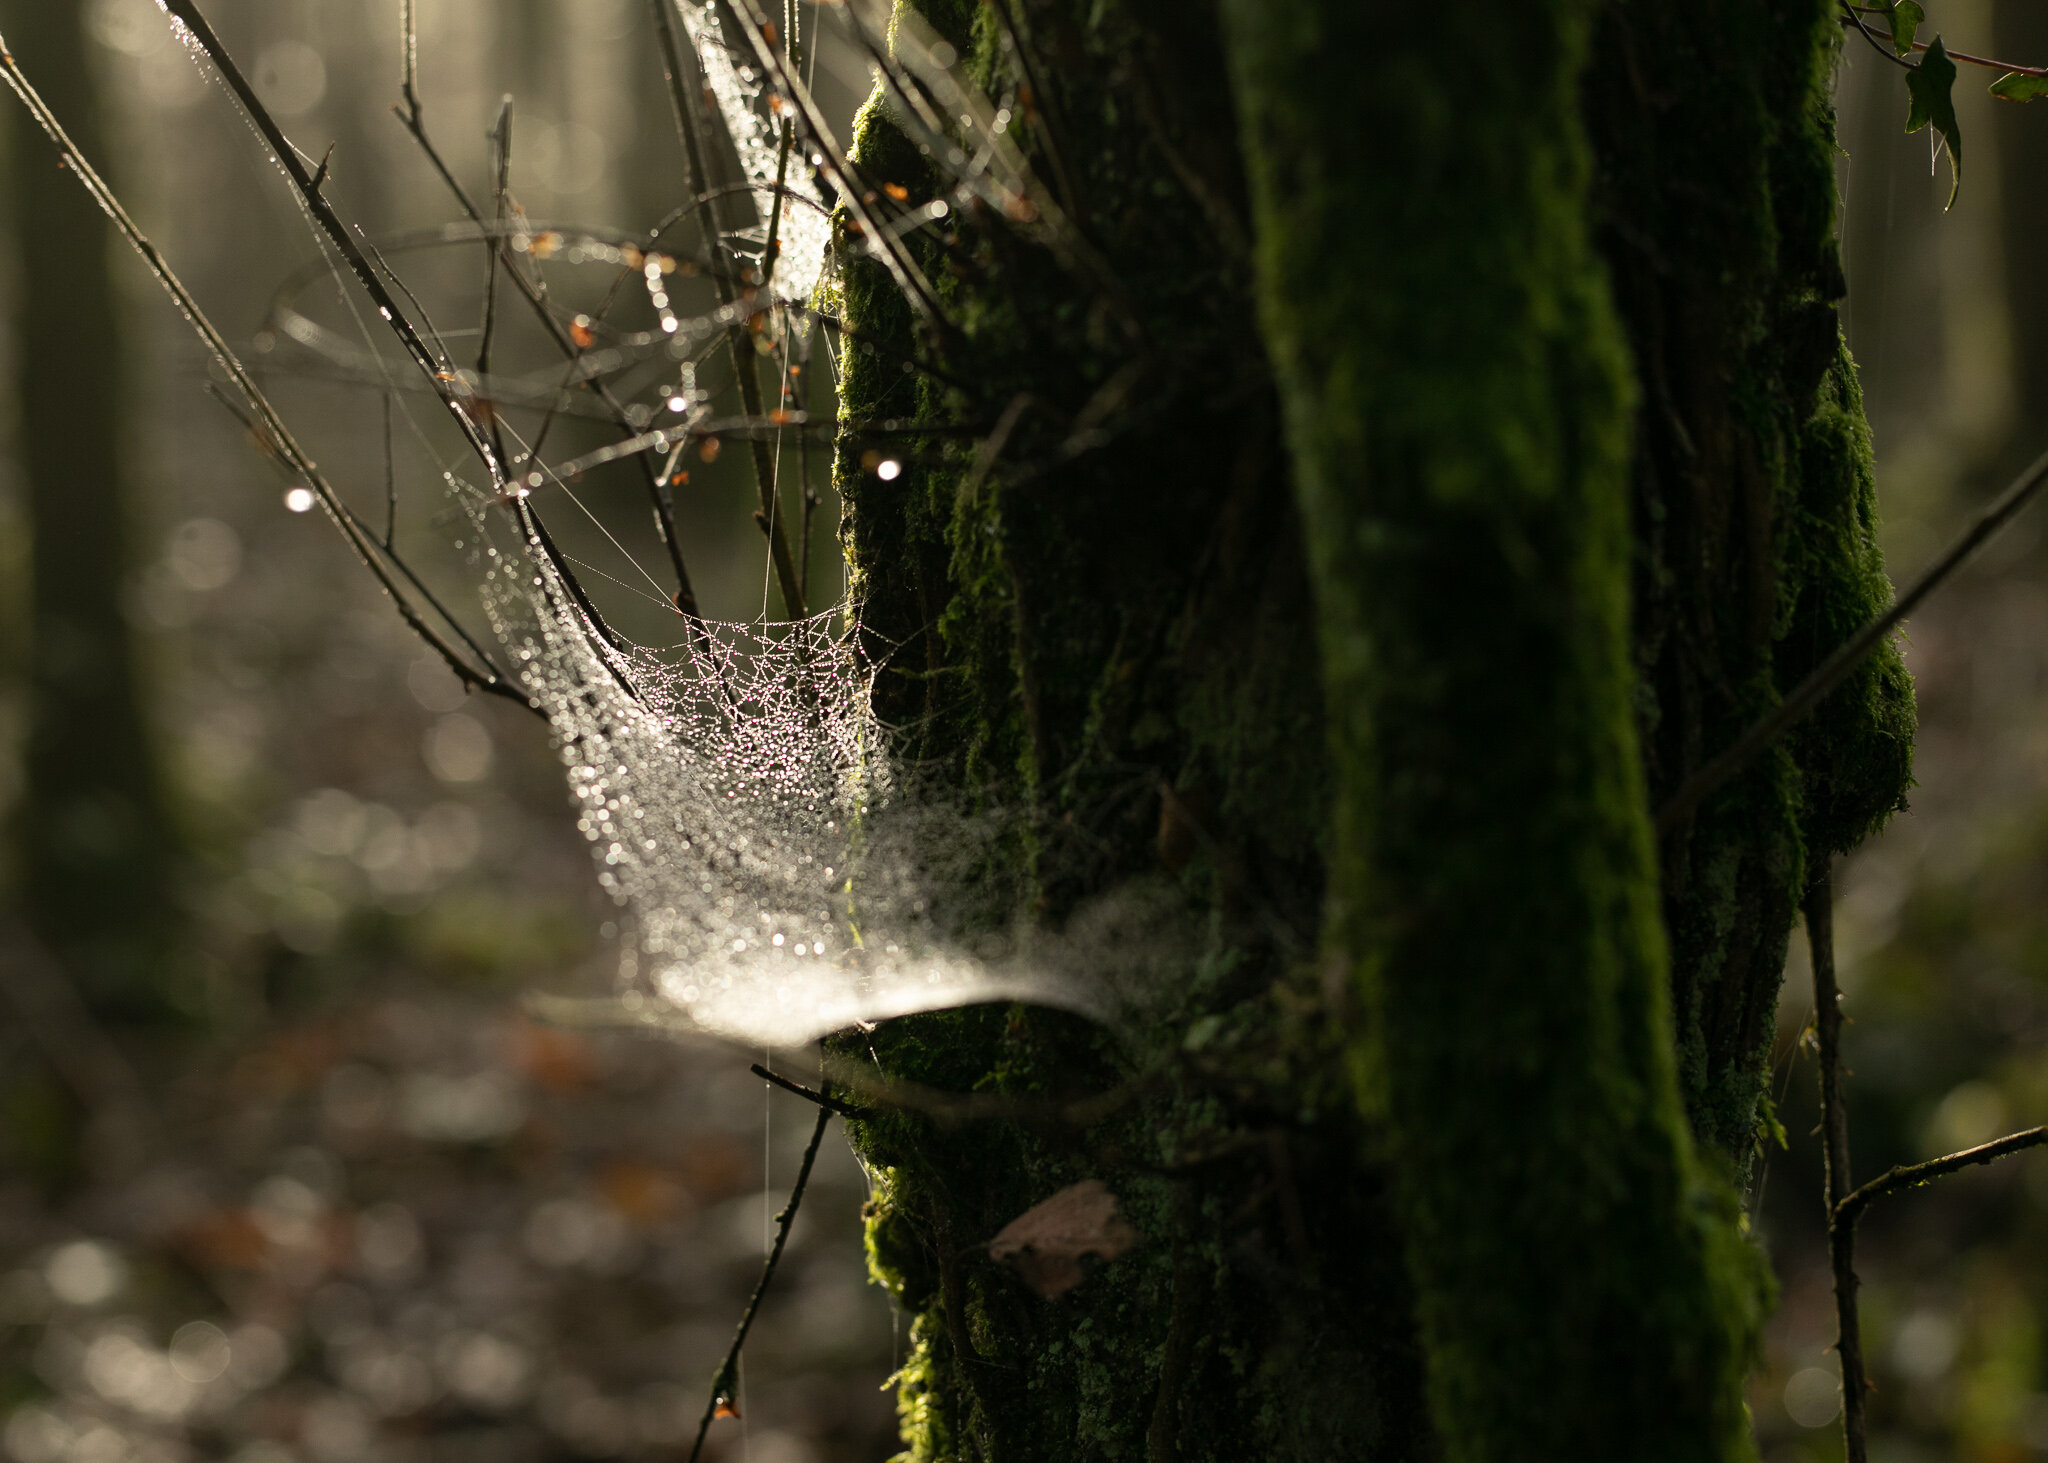 An intriguing spiderweb on a tree trunk. We stood and looked with wonder at the detail, the light and the morning dew. So simple and so beautiful.